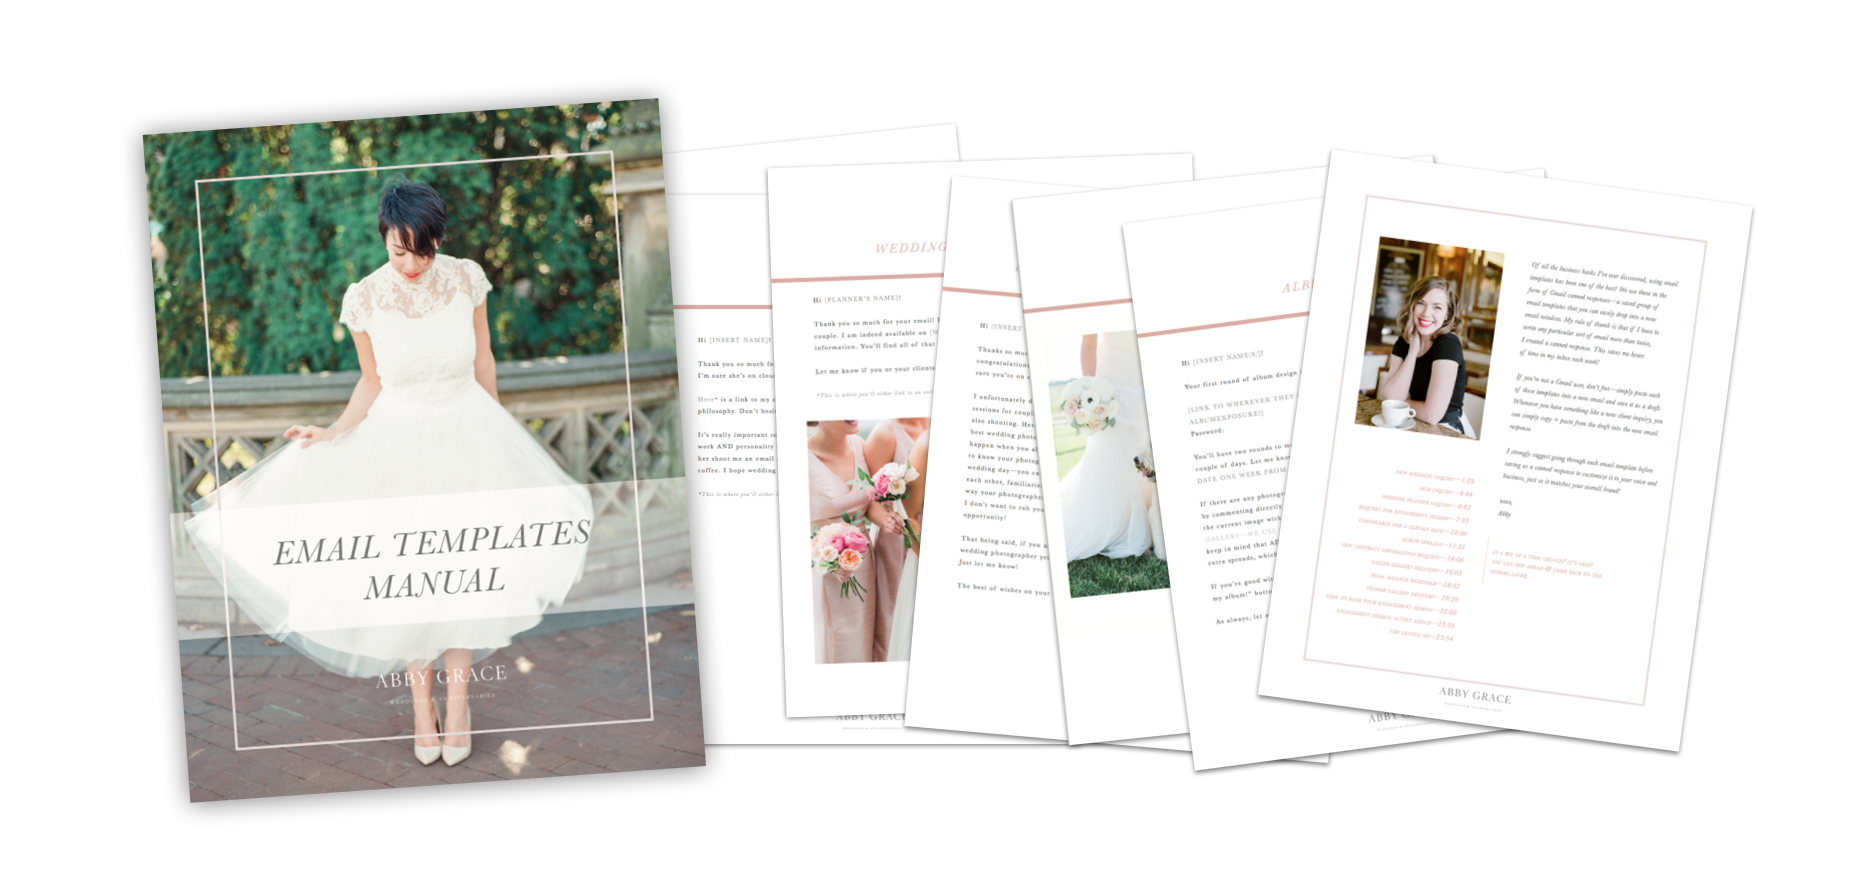 Email templates for wedding photographers | Abby Grace Photography